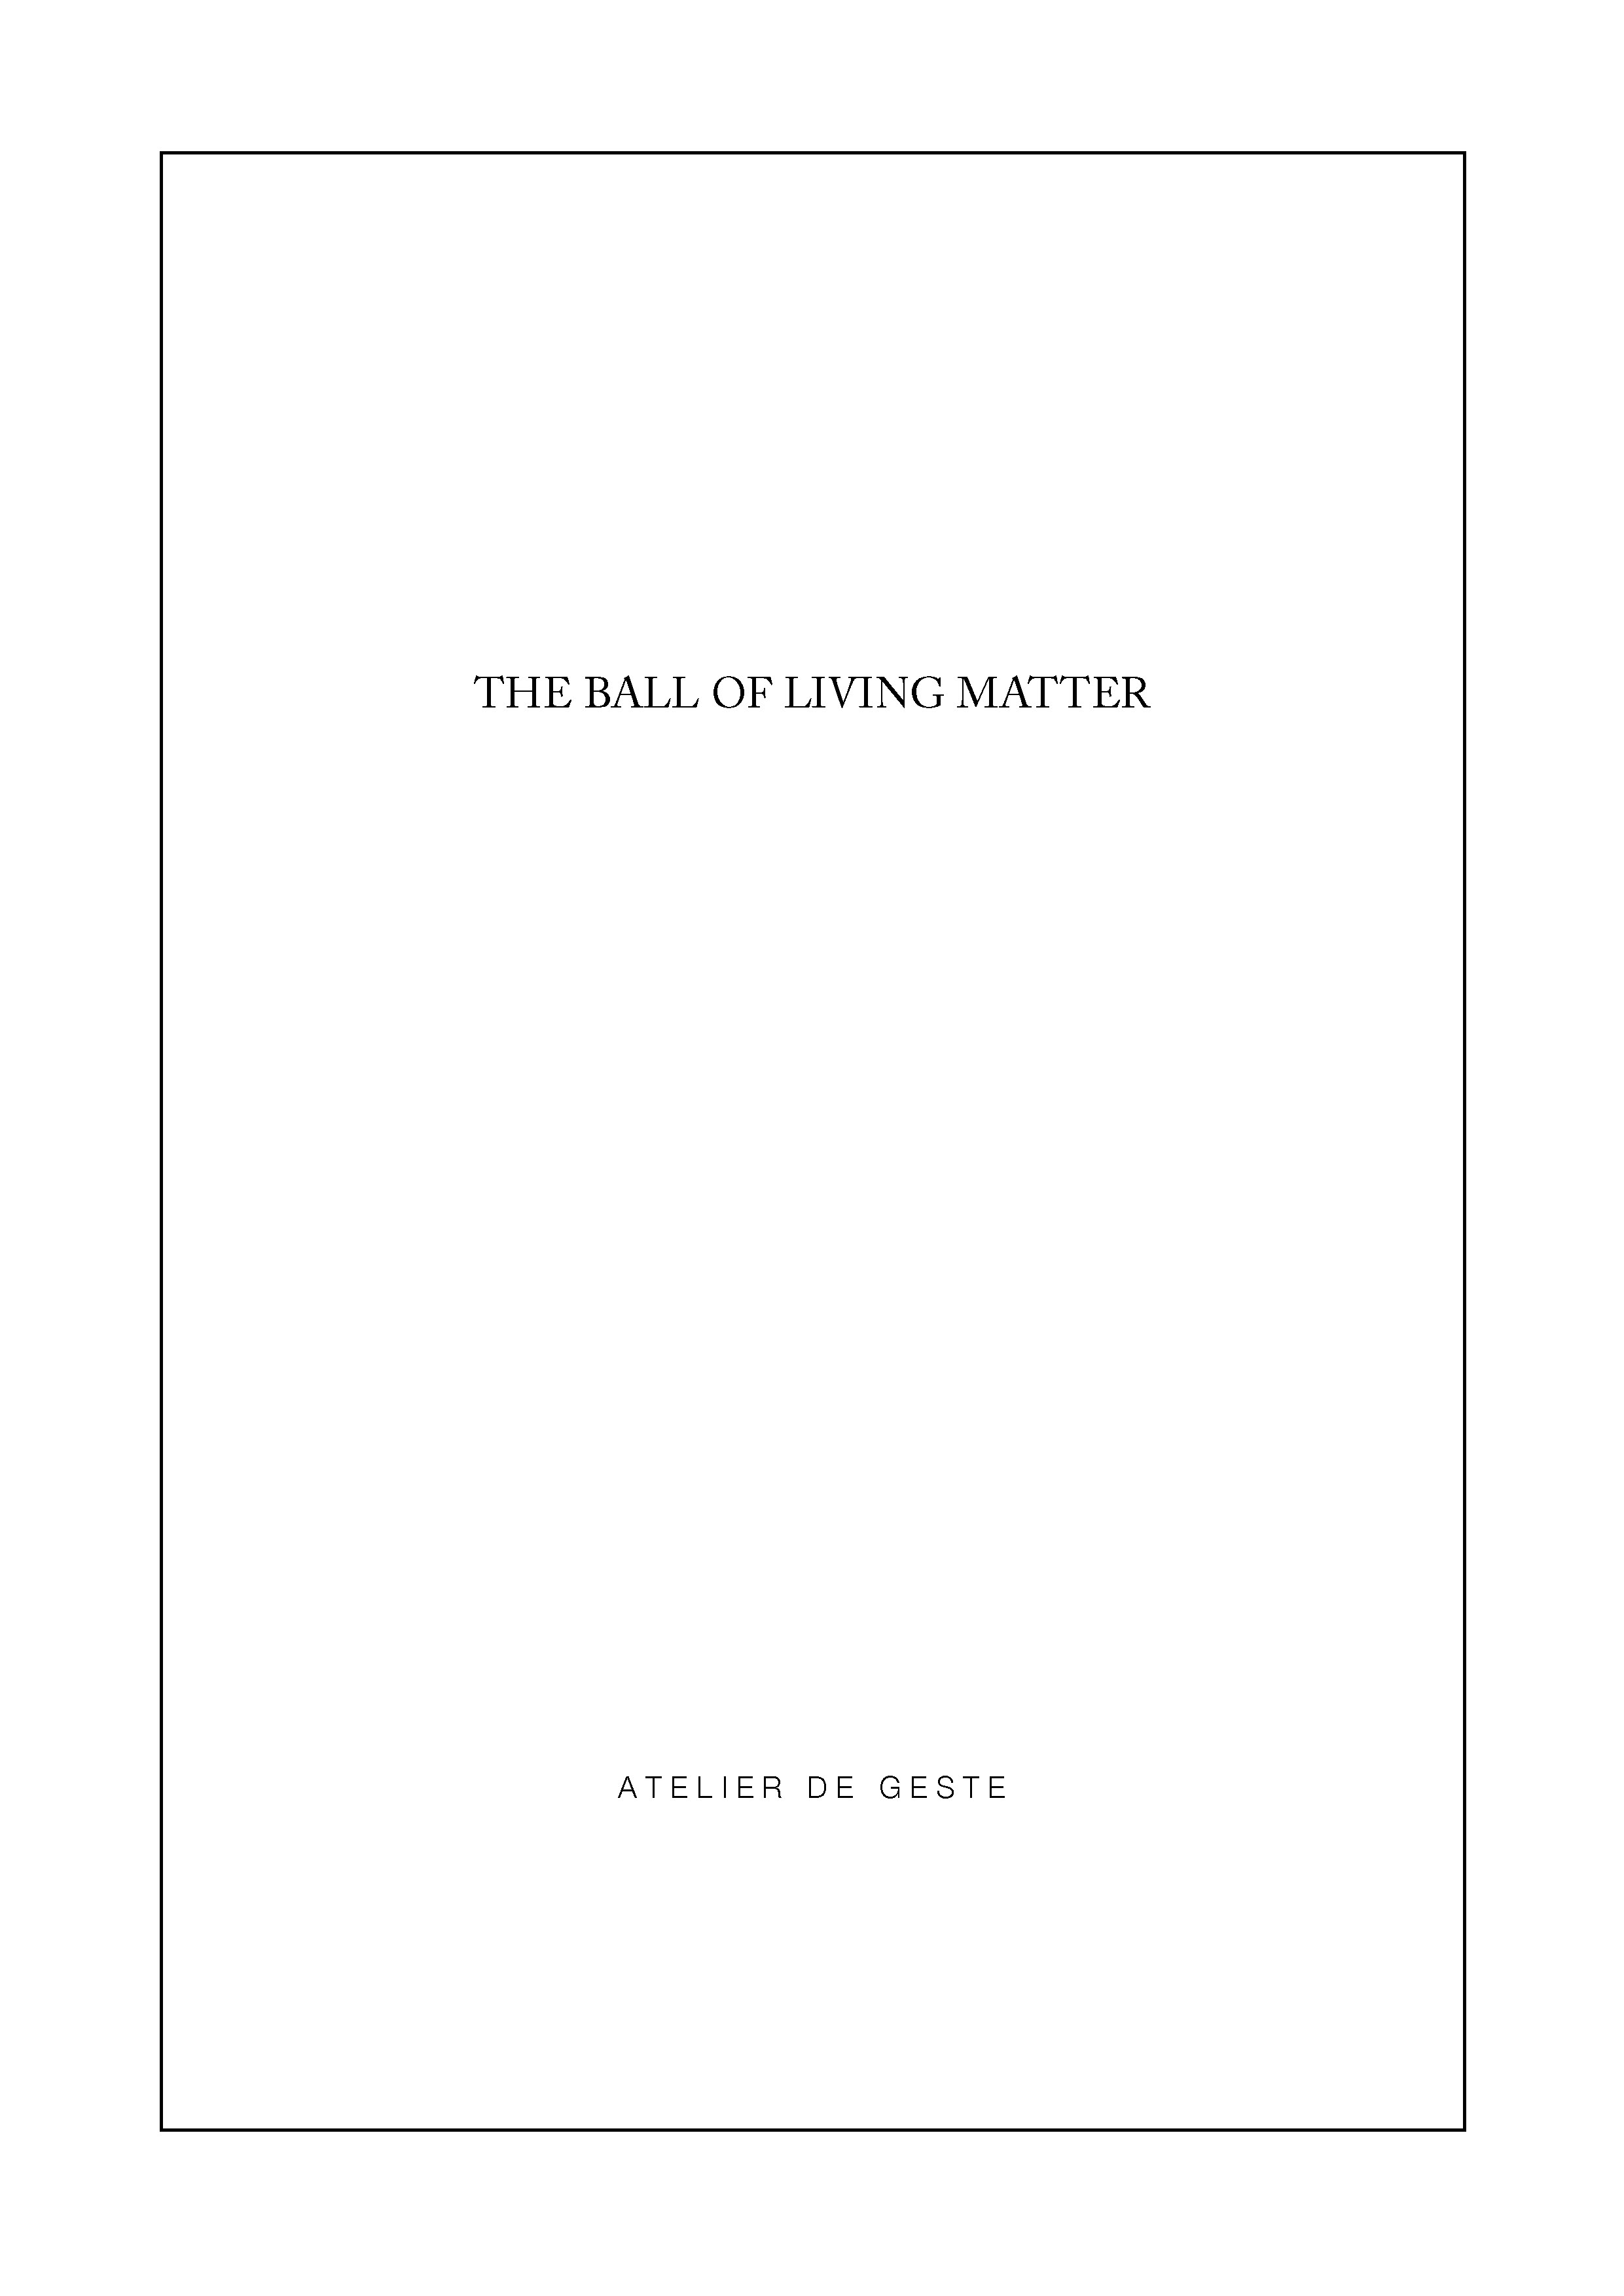 Projet diplôme - The ball of living matter - partition_Page_01.jpg